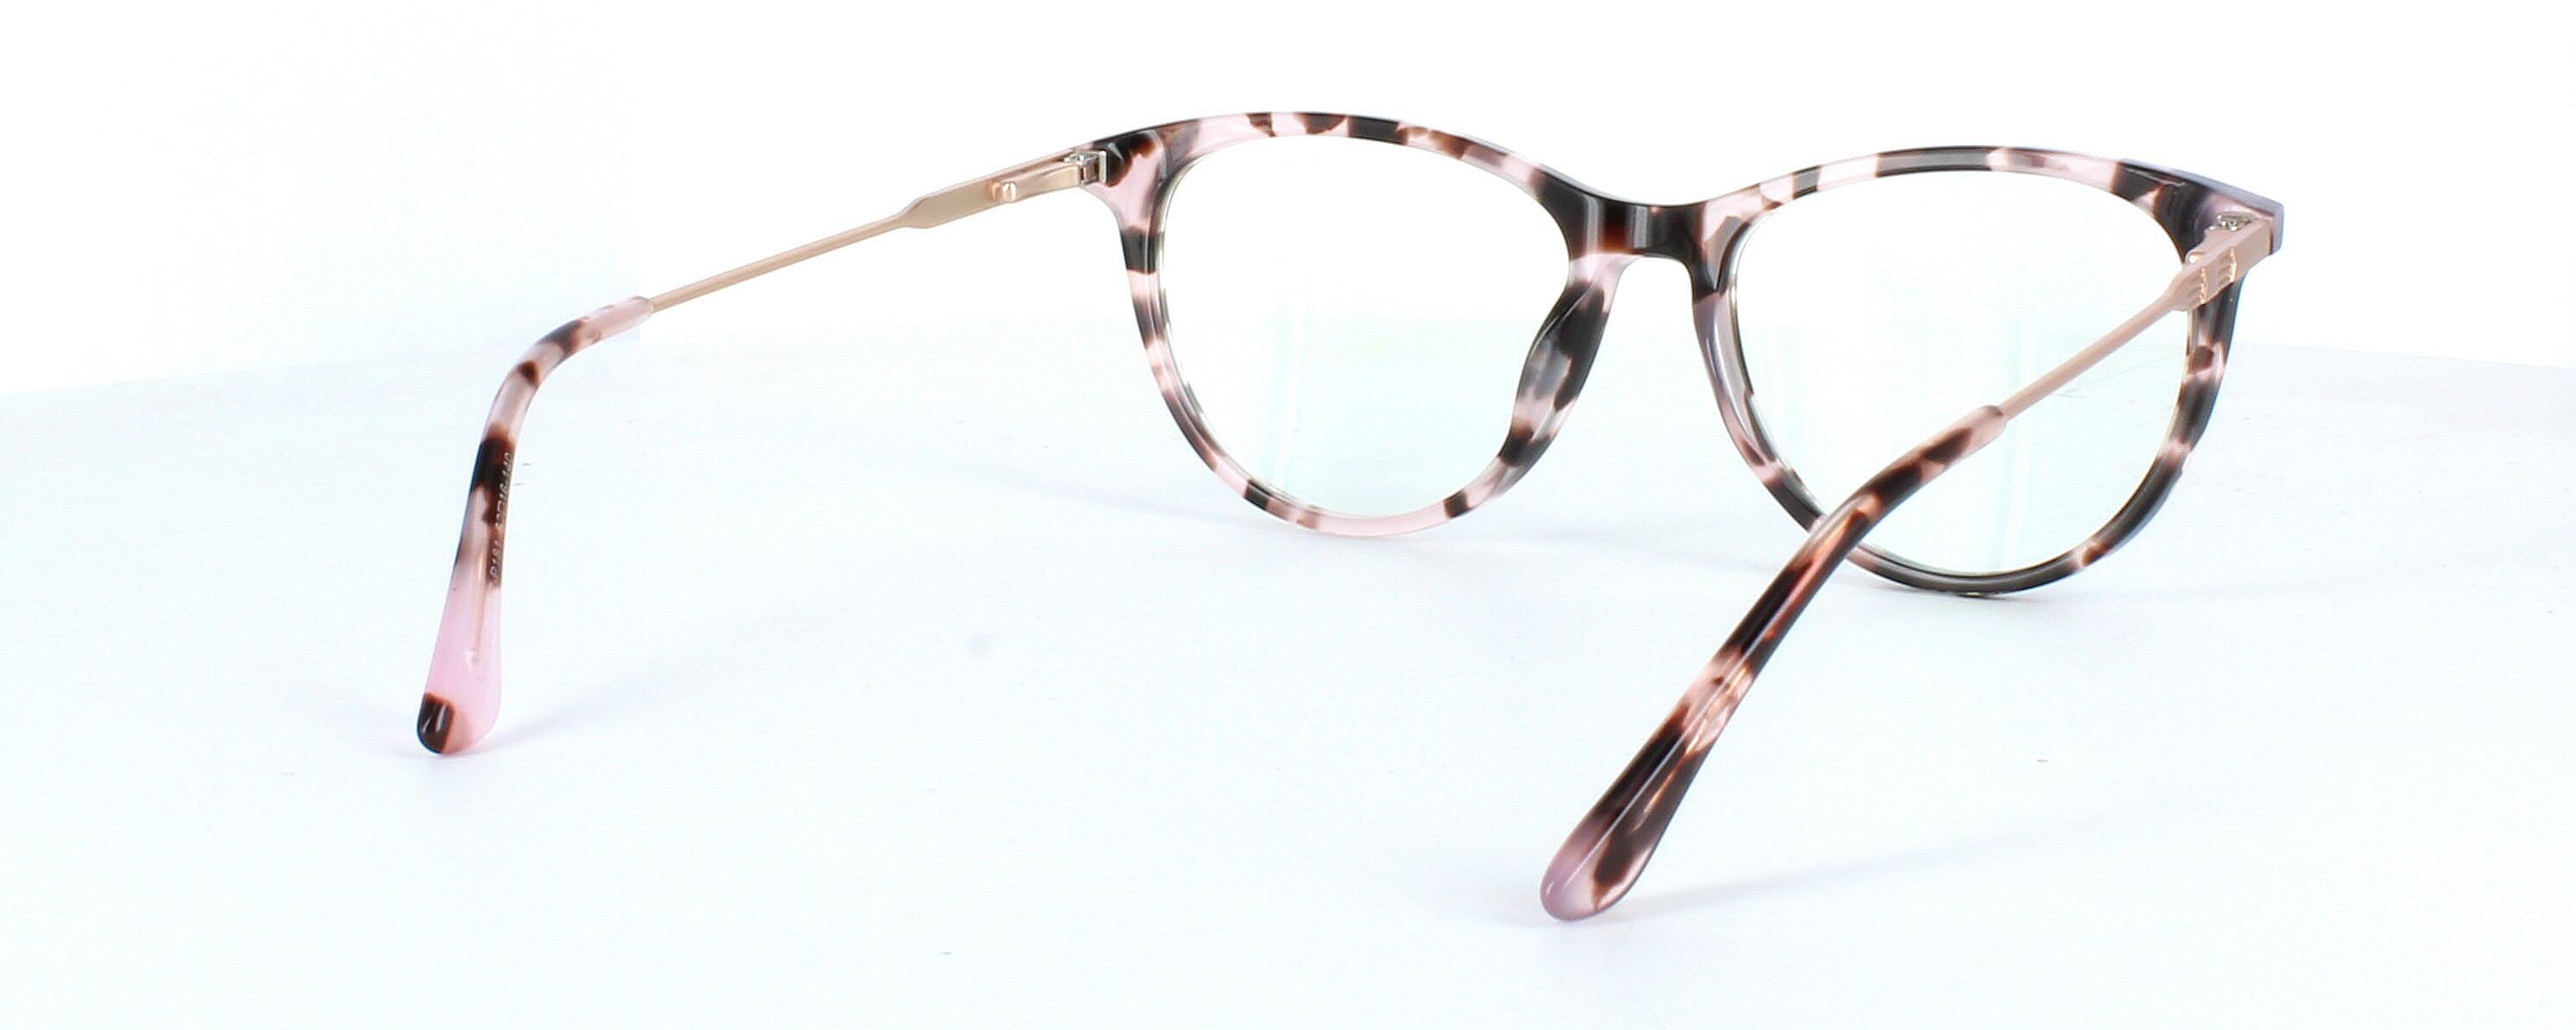 Edward Scotts BJ9202 C617 - Women's oval shaped shiny tortoise acetate glasses with gold metal spring hinged arms - image view 4